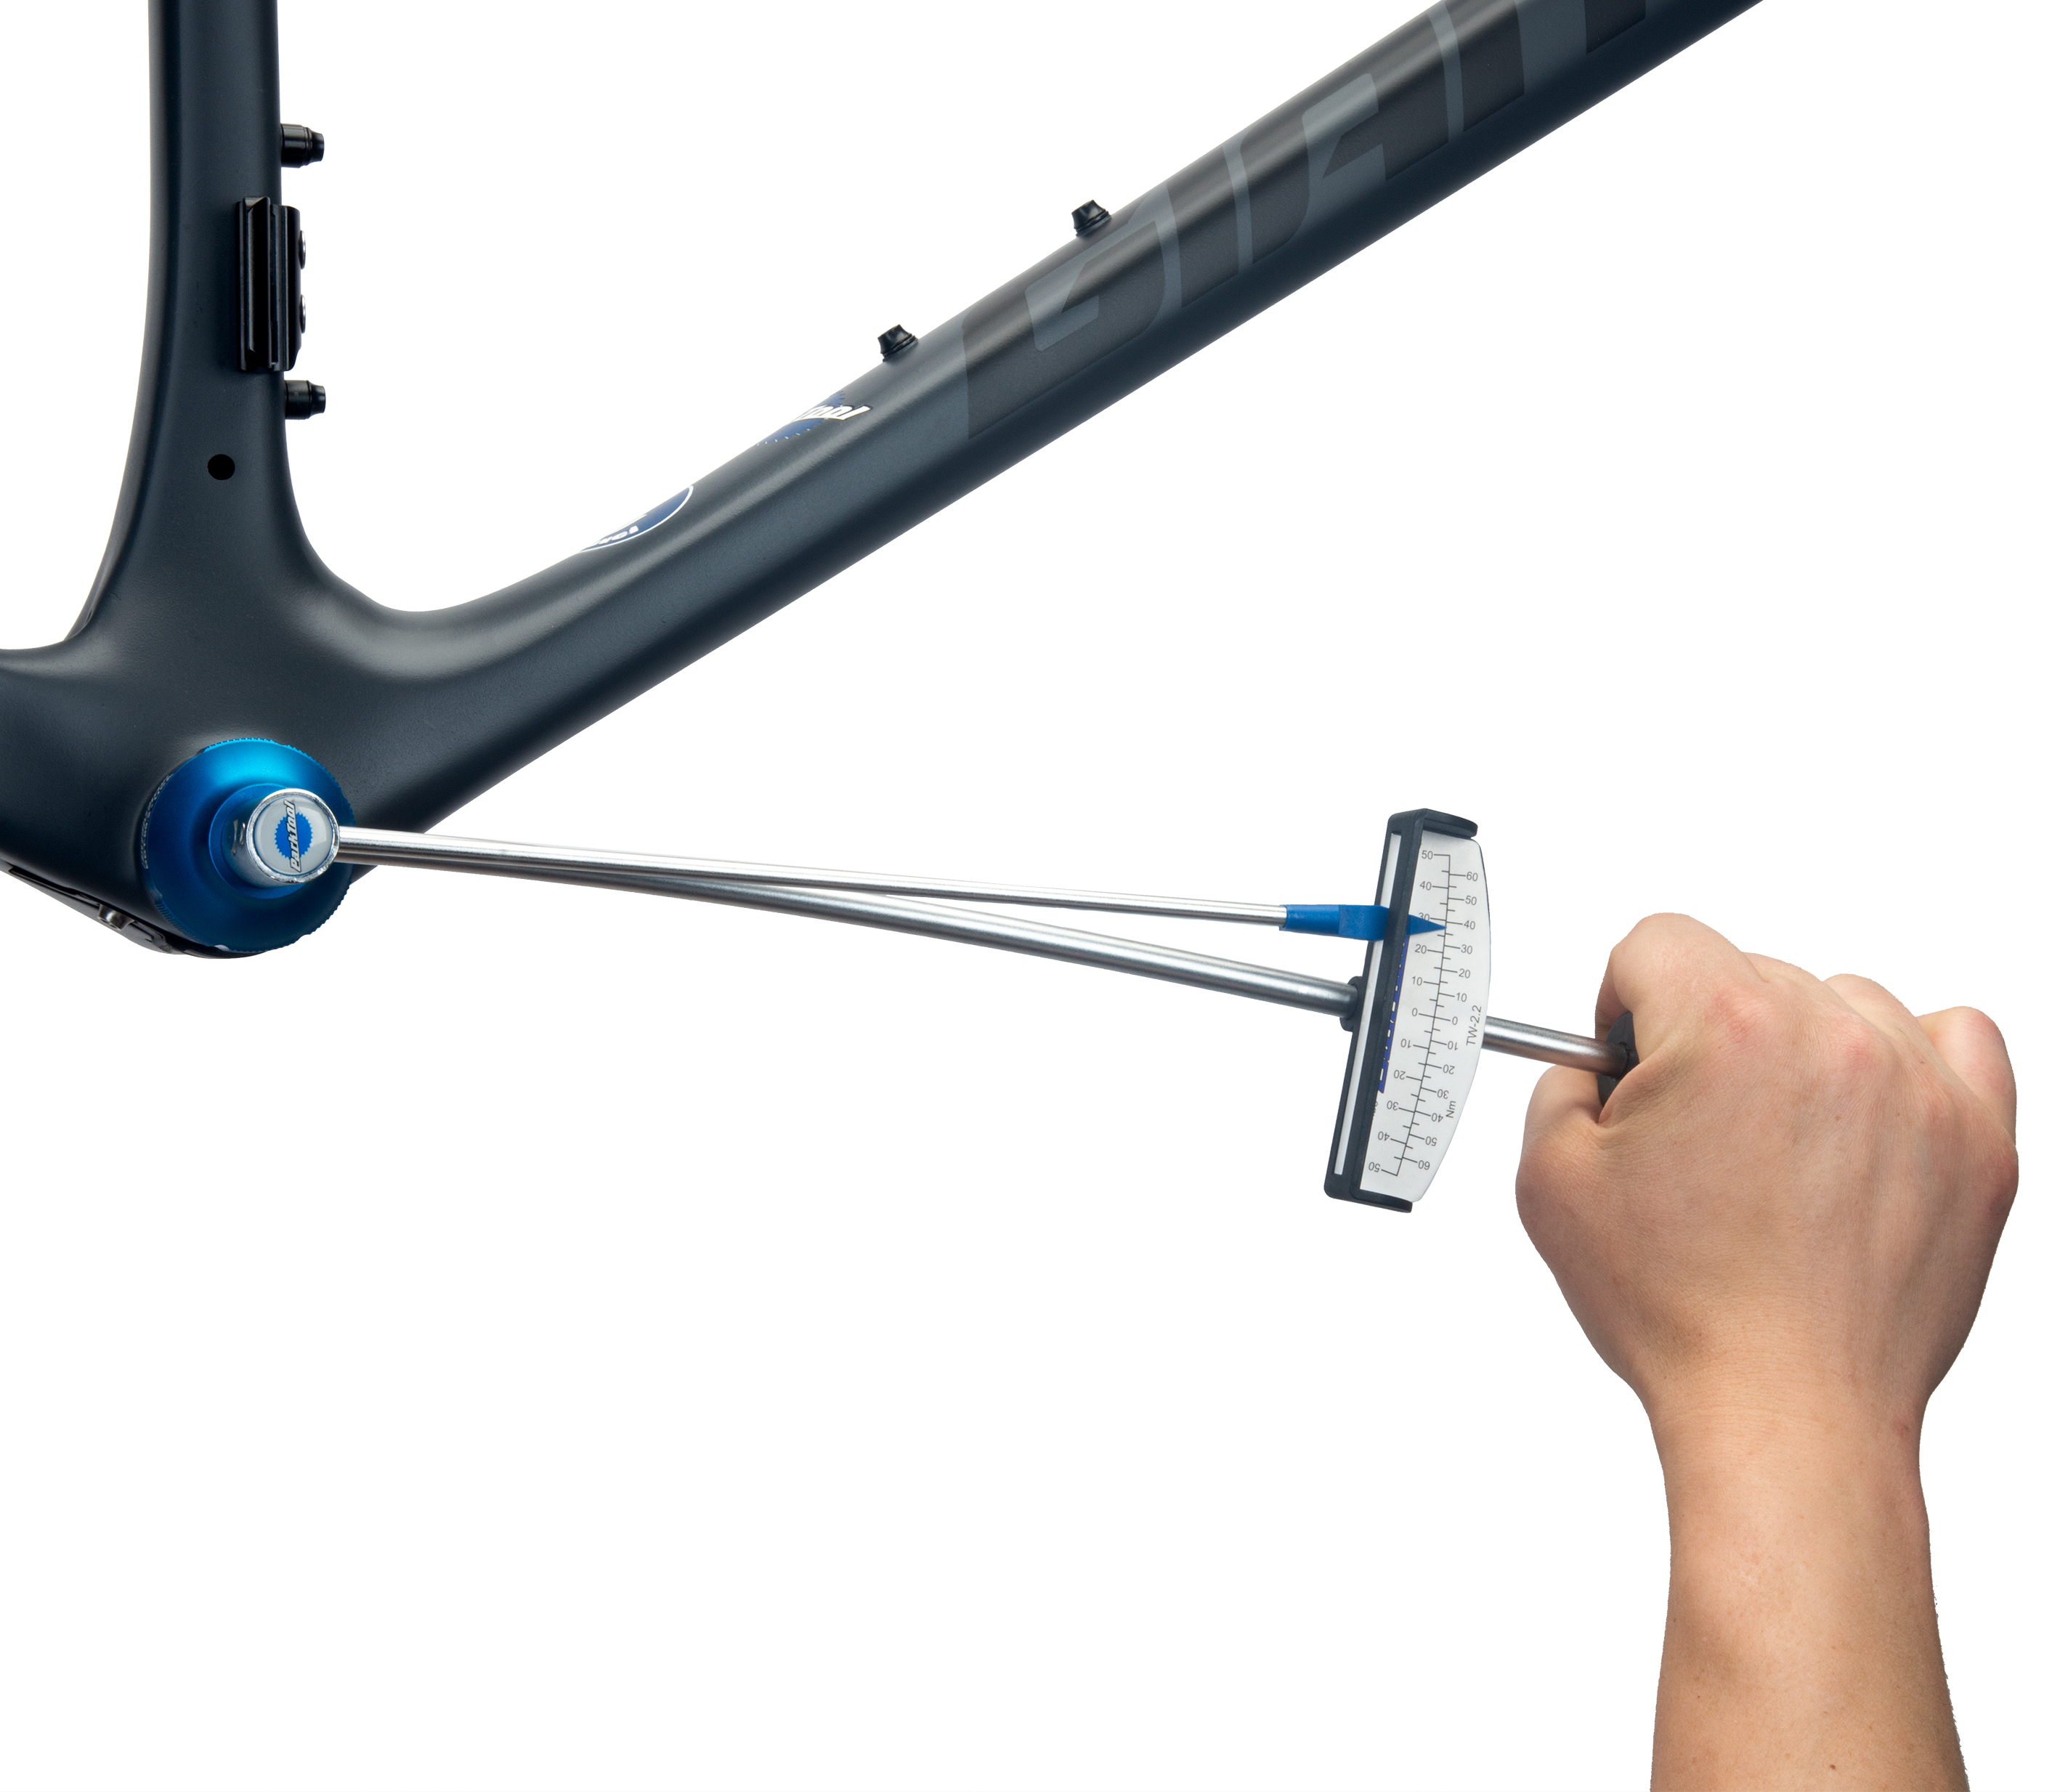 The Park Tool TW-2.2 Beam-Type Torque Wrench driving a Park Tool bottom bracket tool